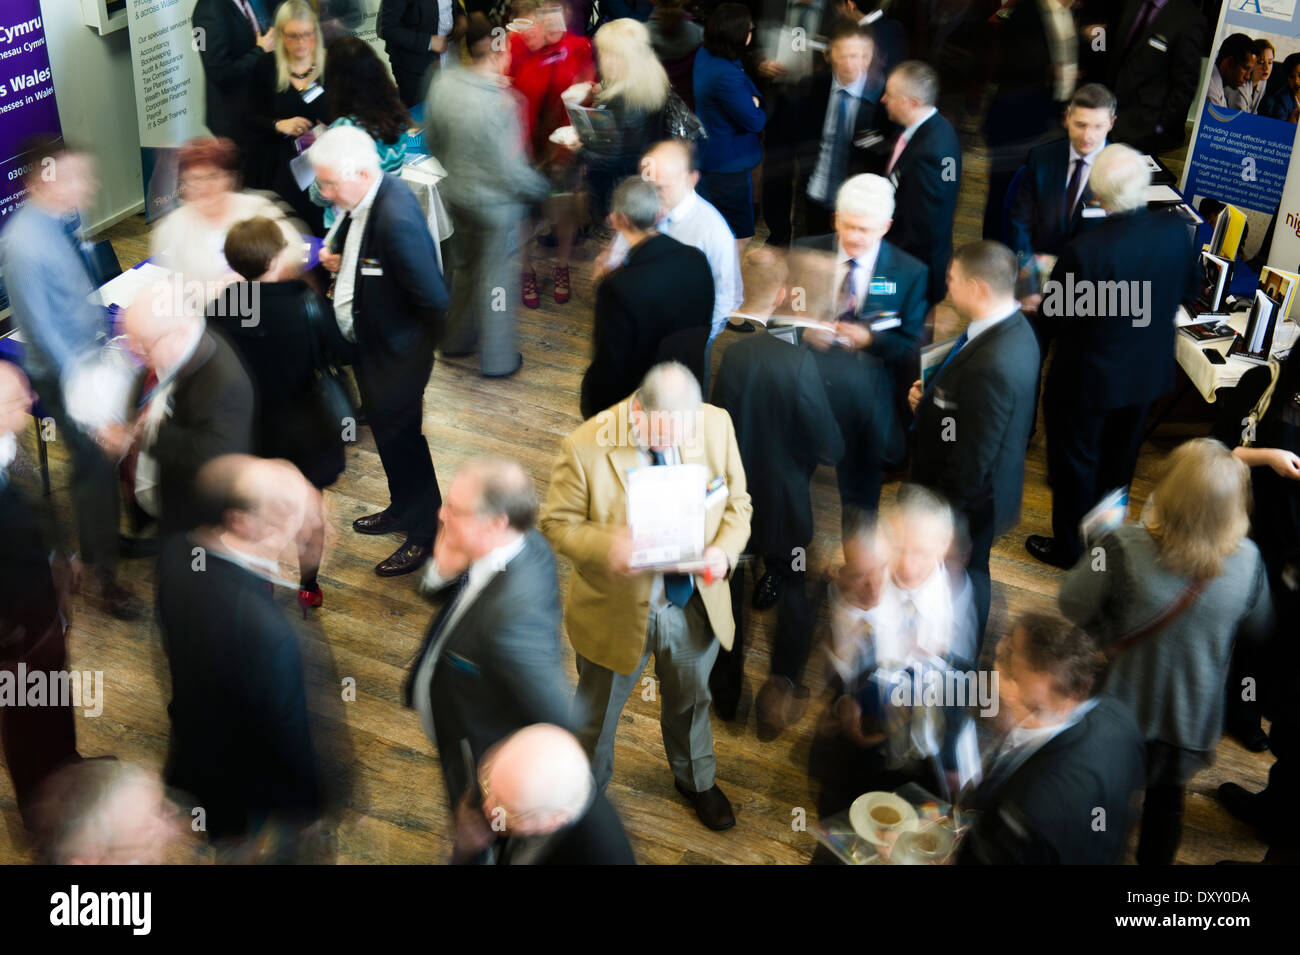 Overhead view of businessmen and women talking informally during coffee break at a networking conference event UK -  slow shutter speed motion blur blurred figures Stock Photo